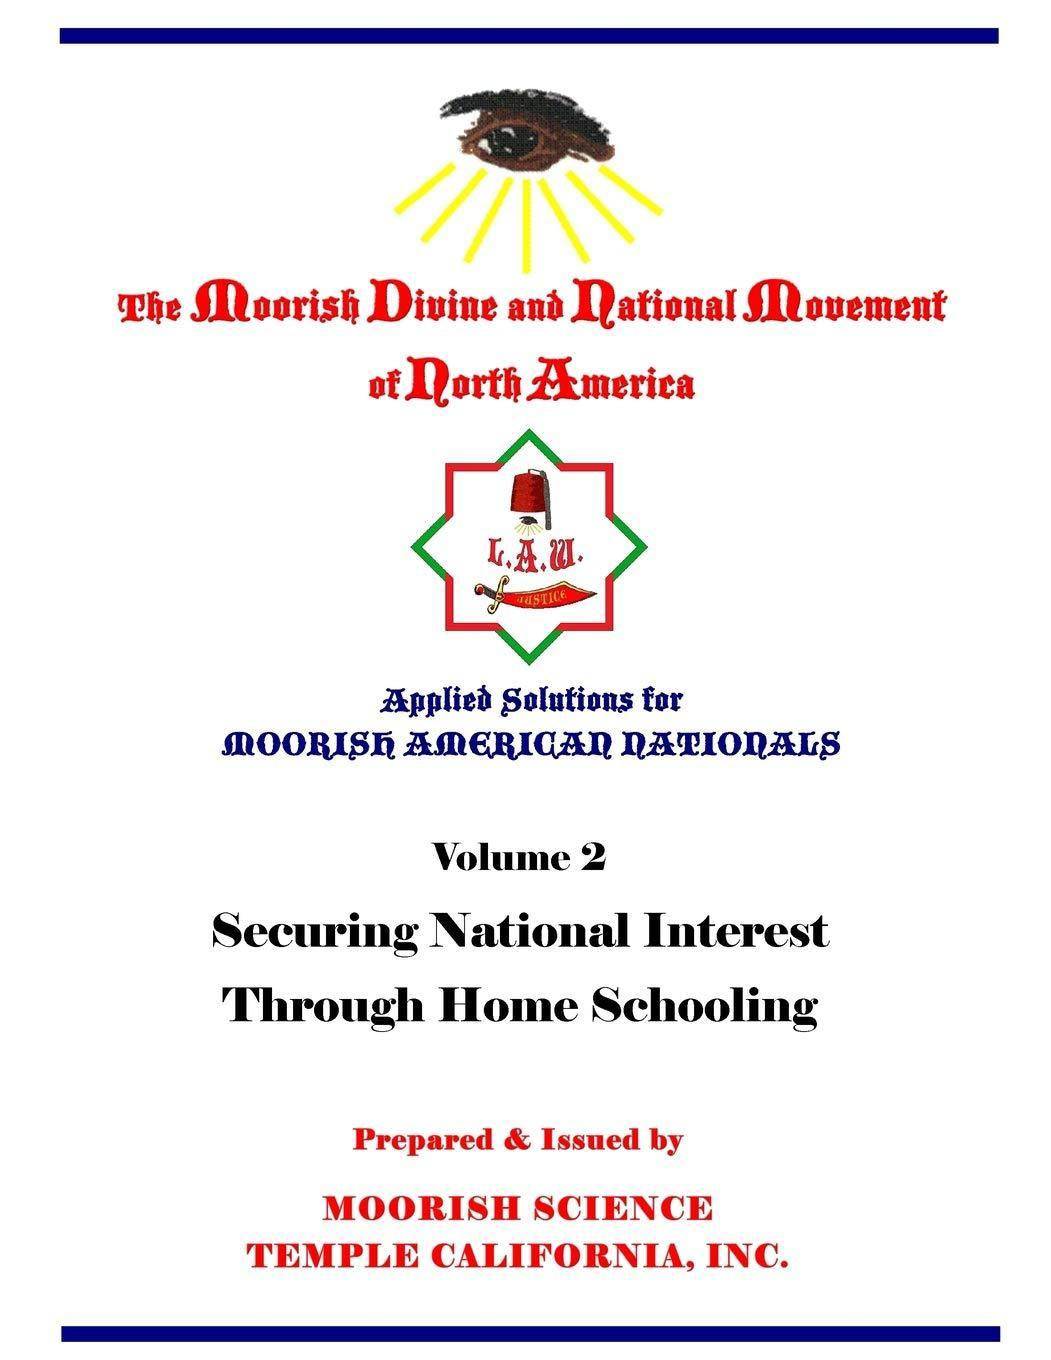 Applied Solutions for Moorish Nationals: Securing National Inter - SureShot Books Publishing LLC